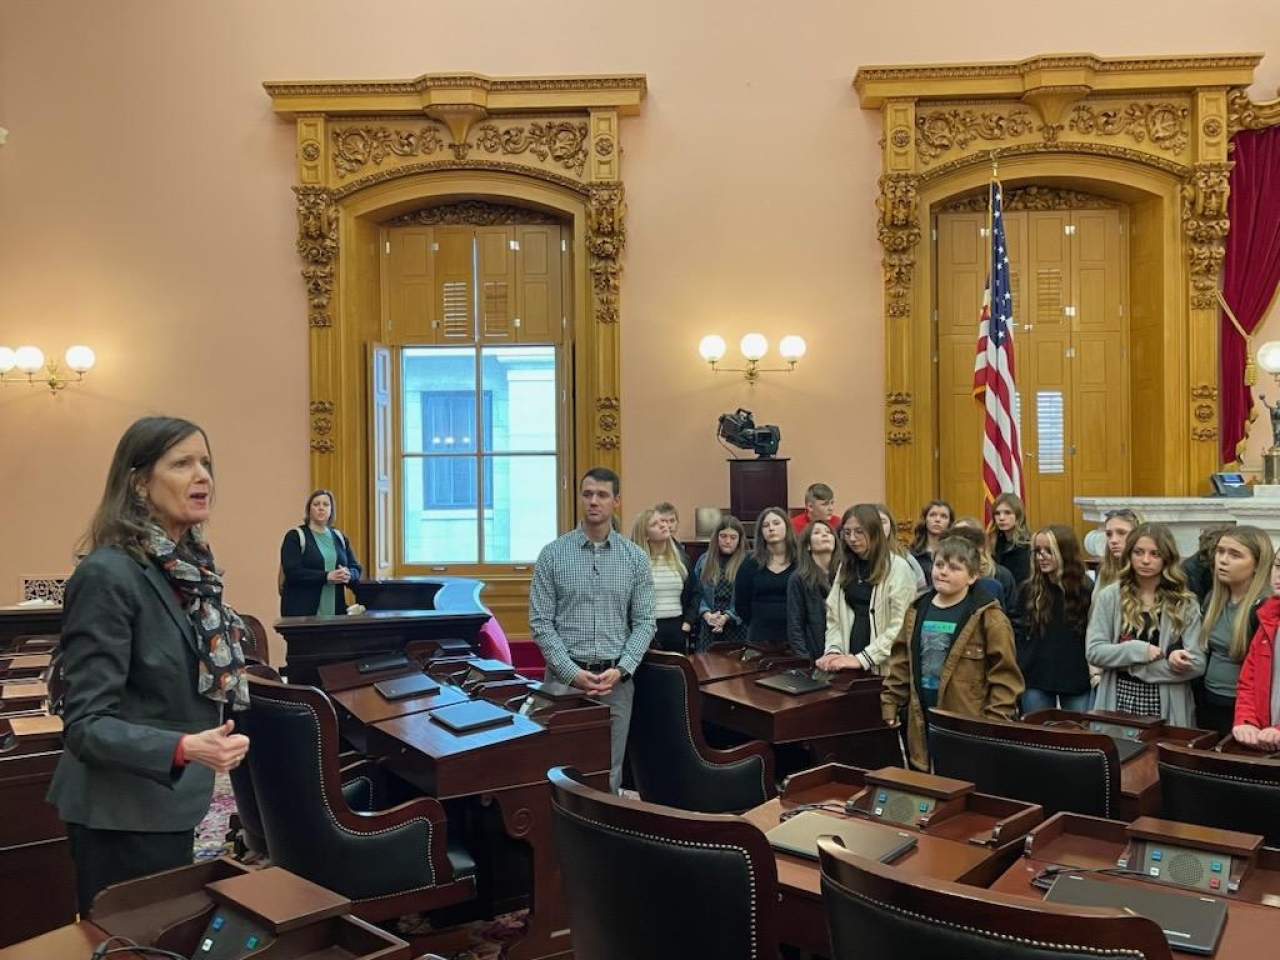 Representative Richardson was excited to welcome the 7th grade class from Fairbanks to the floor of the Ohio House. They were inquisitive, polite and well behaved.